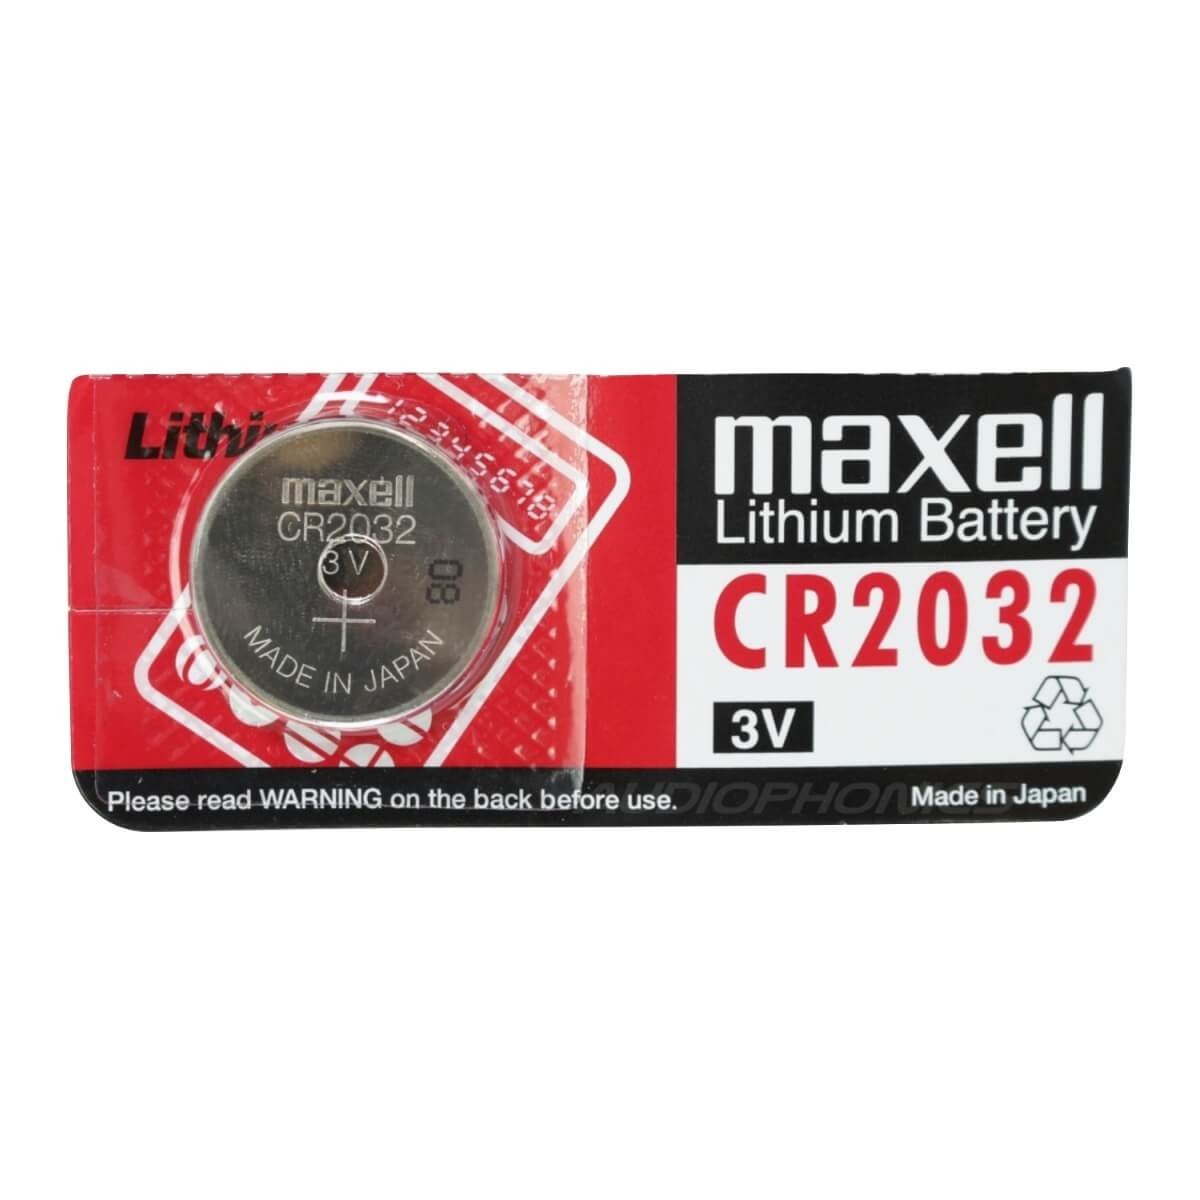 Maxell Lithium "CR2032" Battery